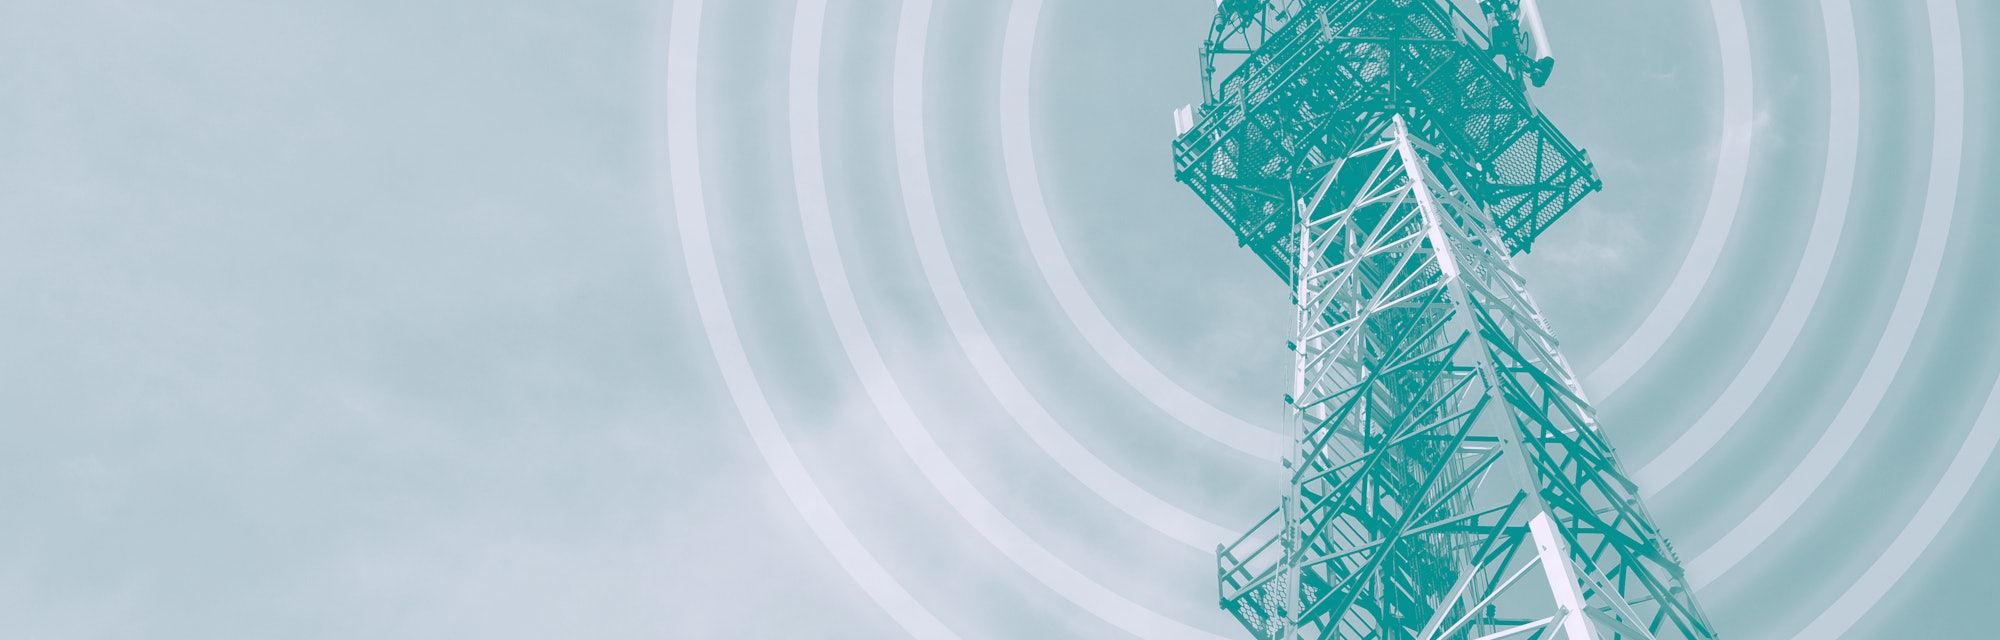 Telecom tower and 5G network graphic